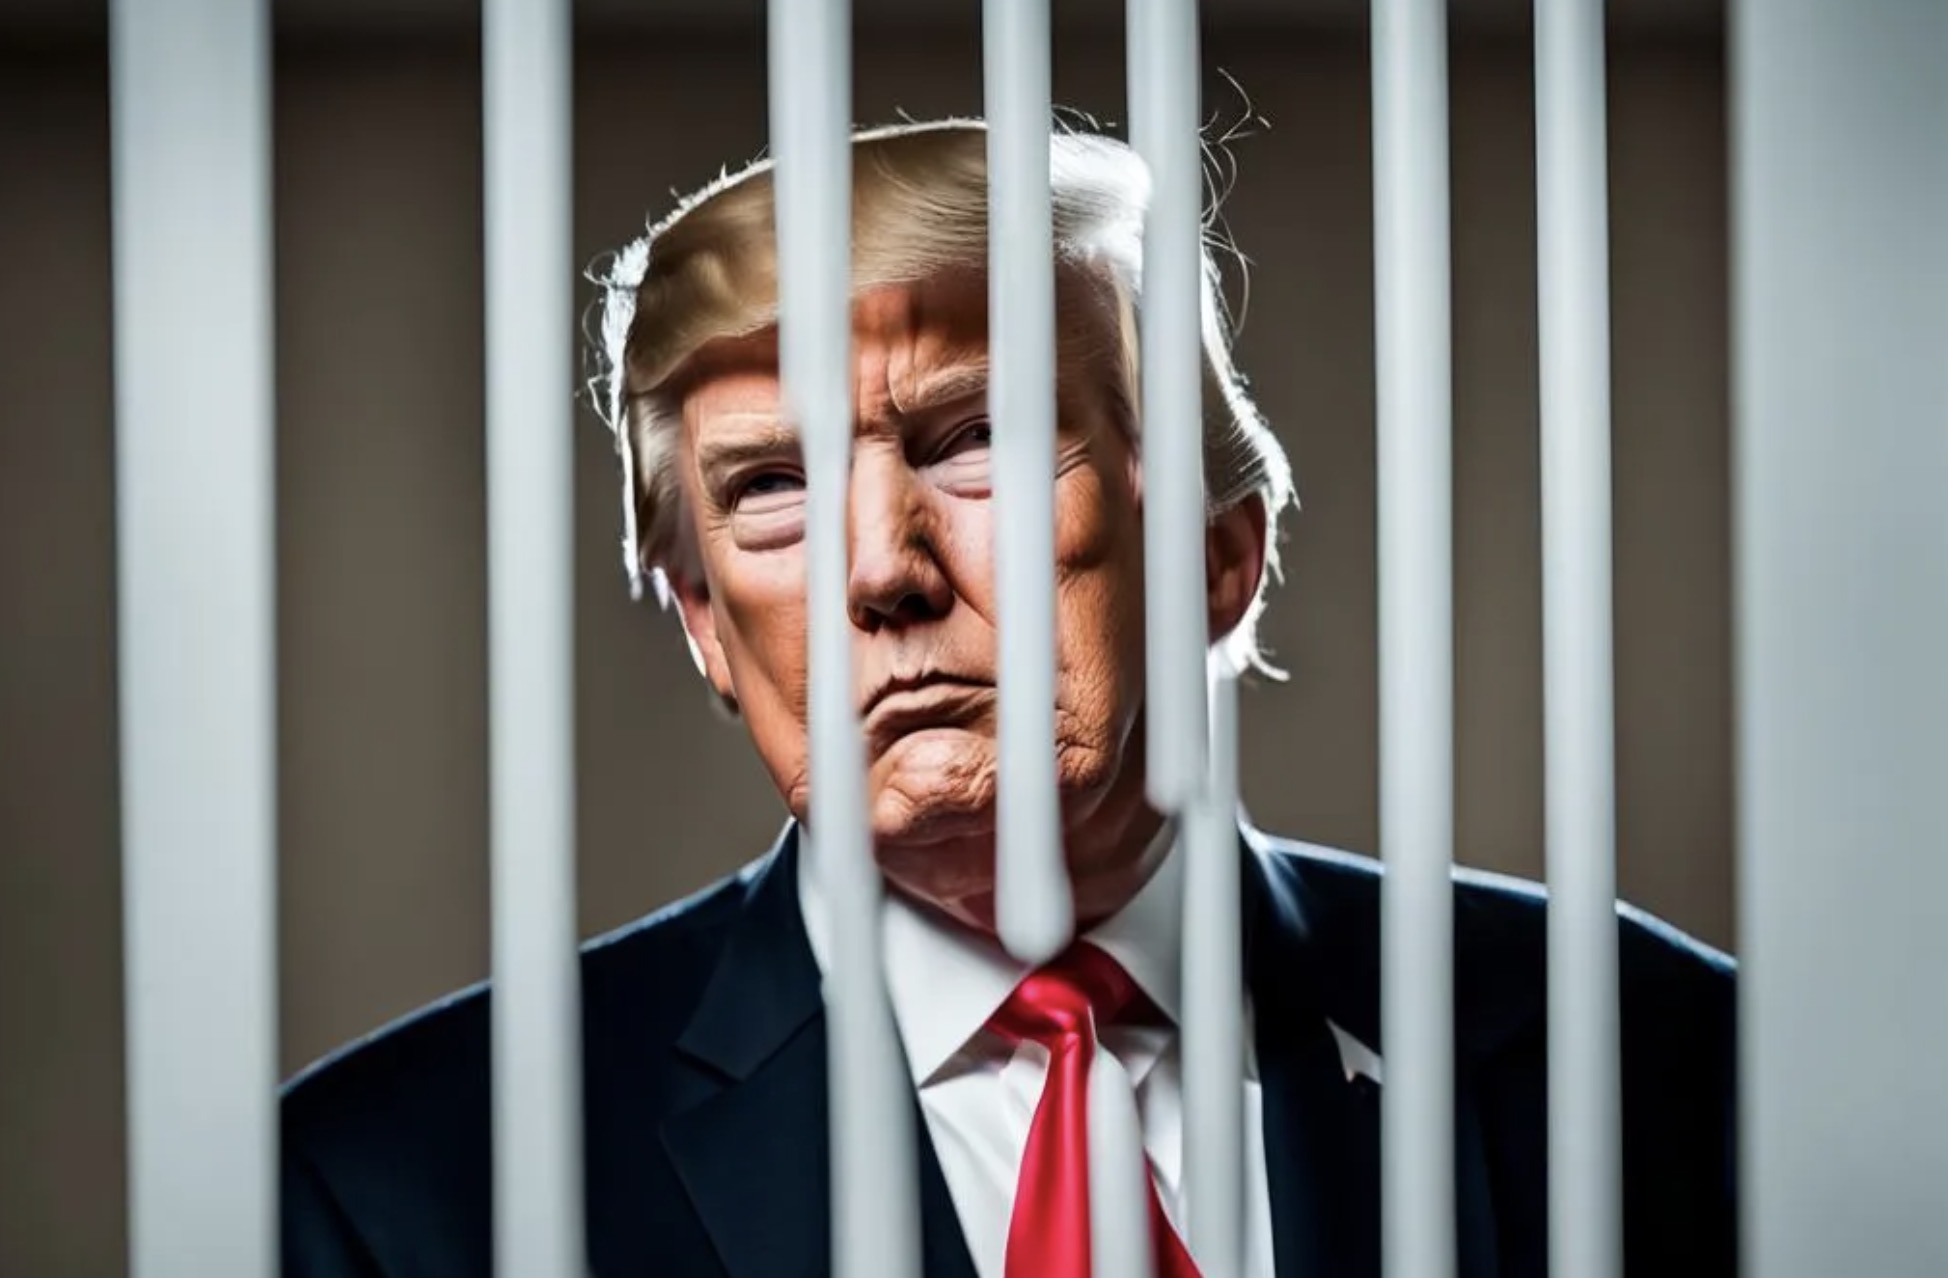 It’s Time To Jail Trump – State of the Union